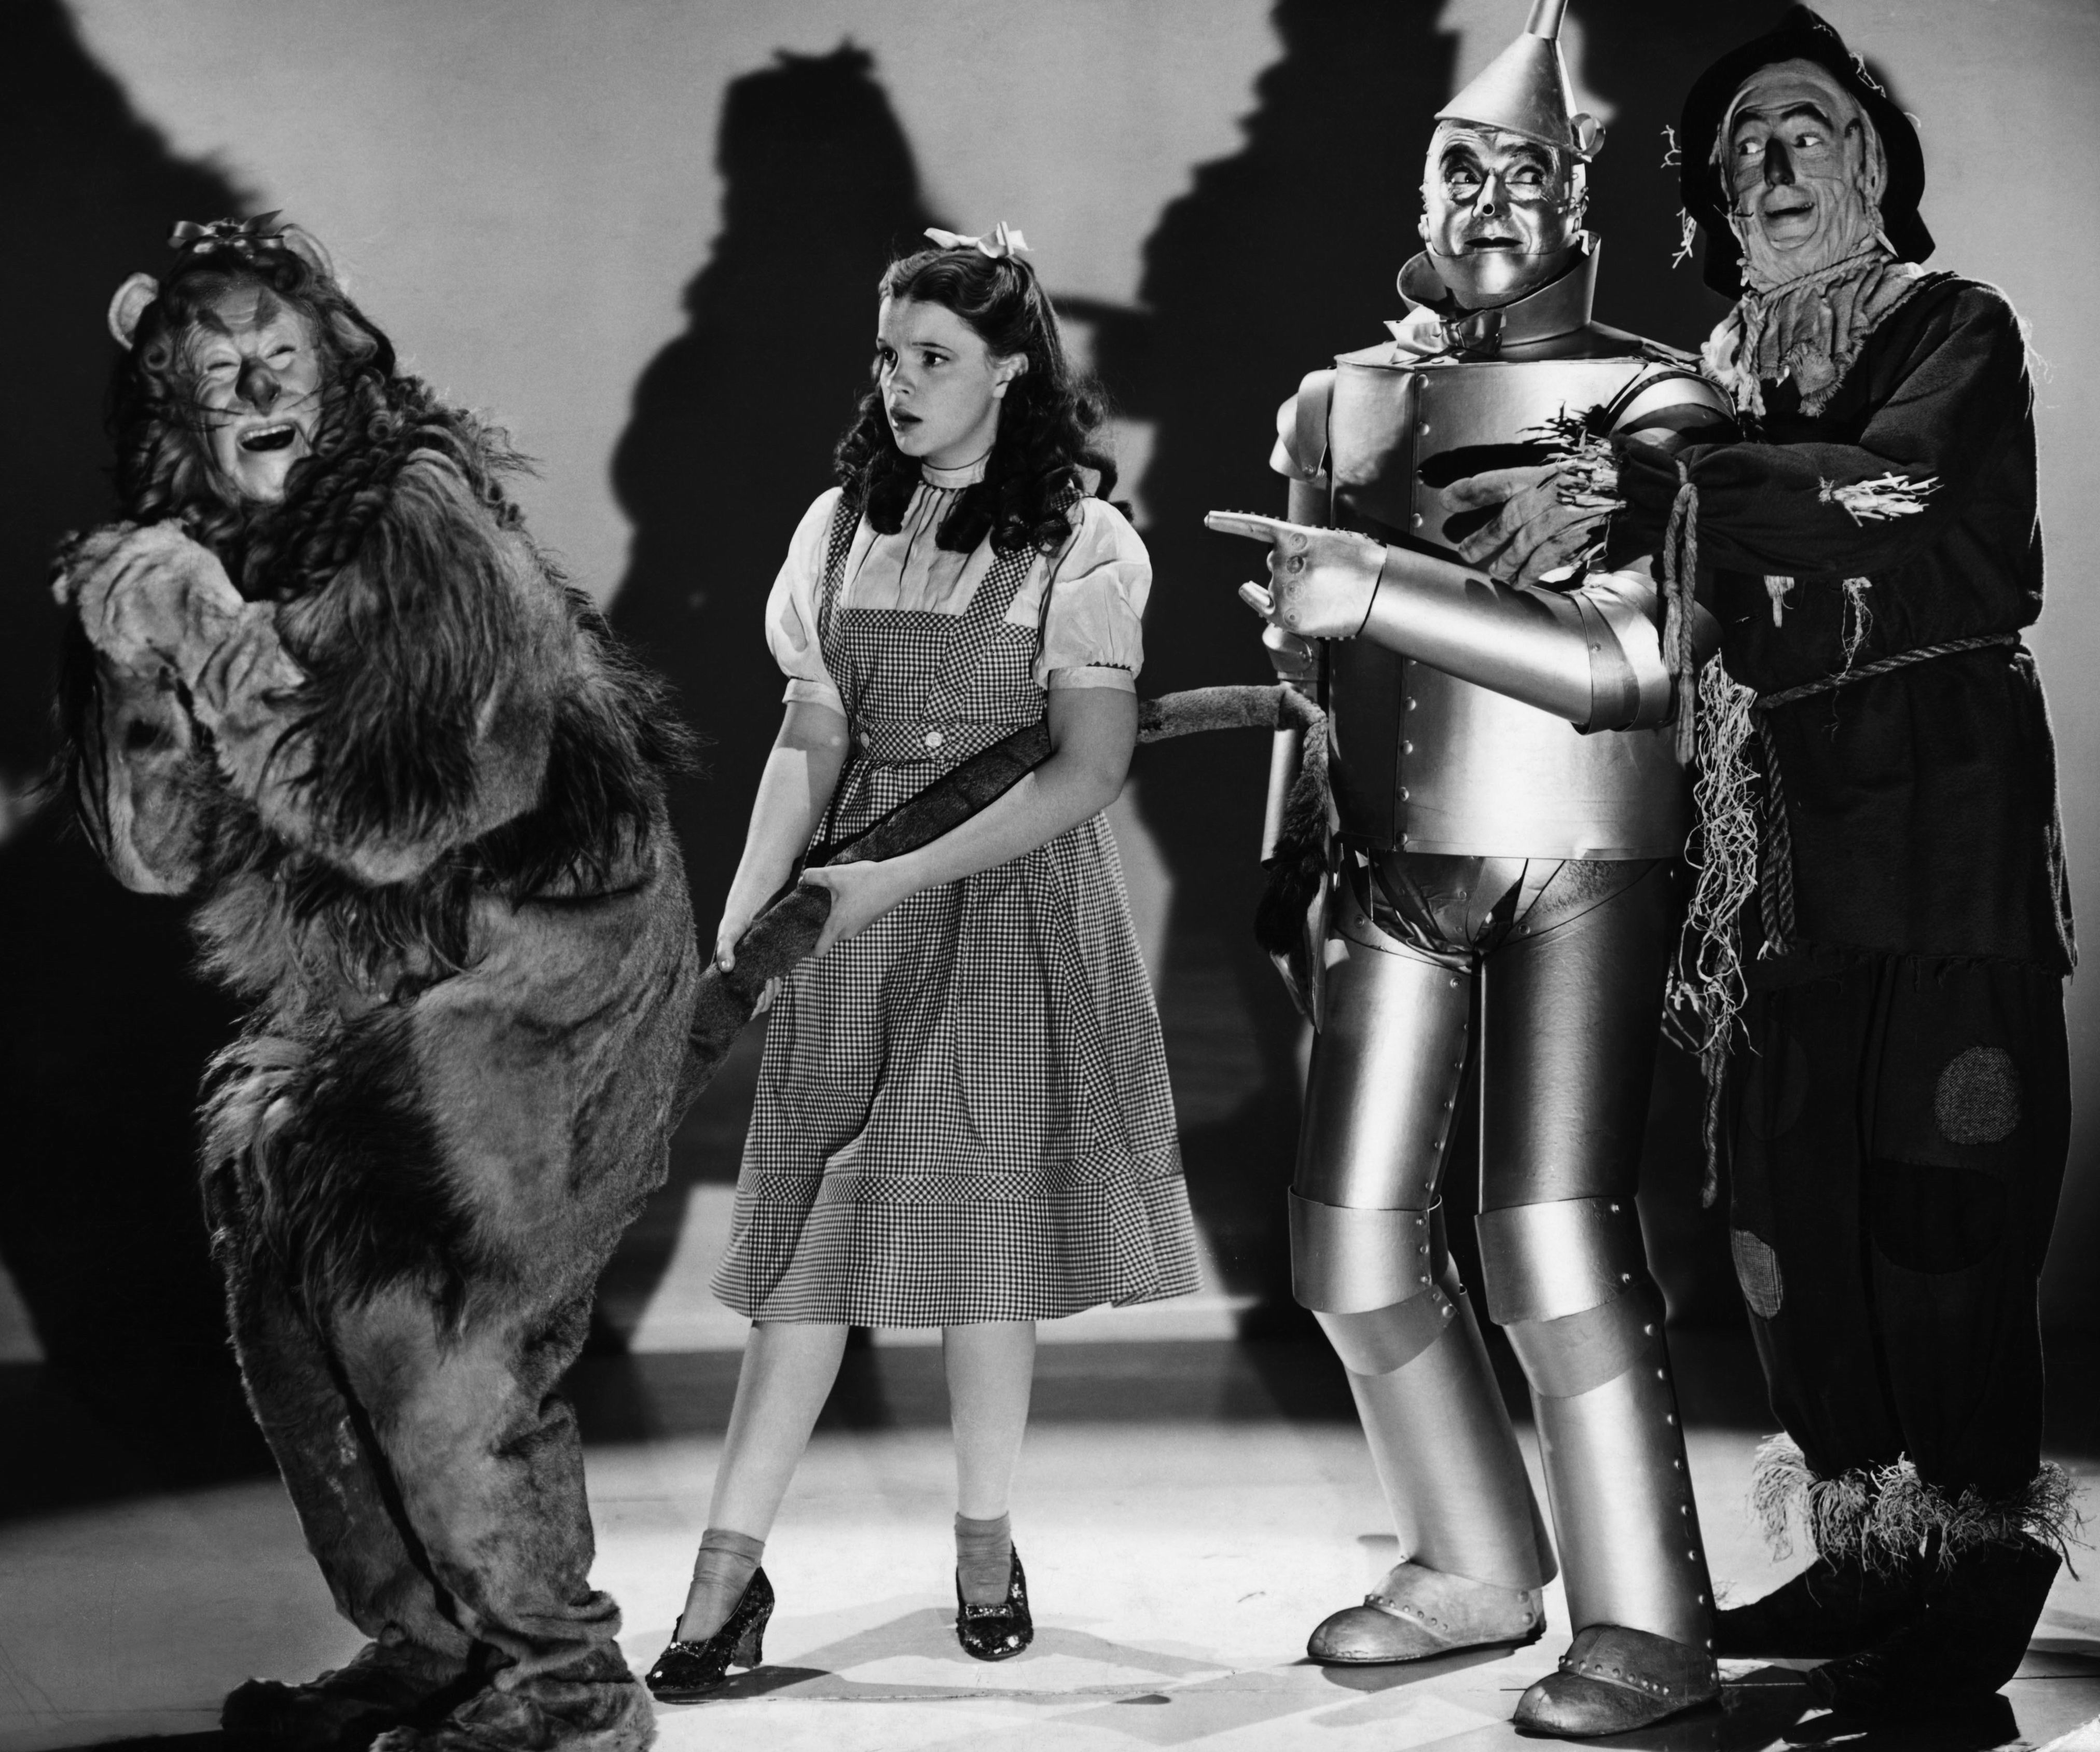 Movie The Wizard Of Oz (1939) HD Wallpaper | Background Image